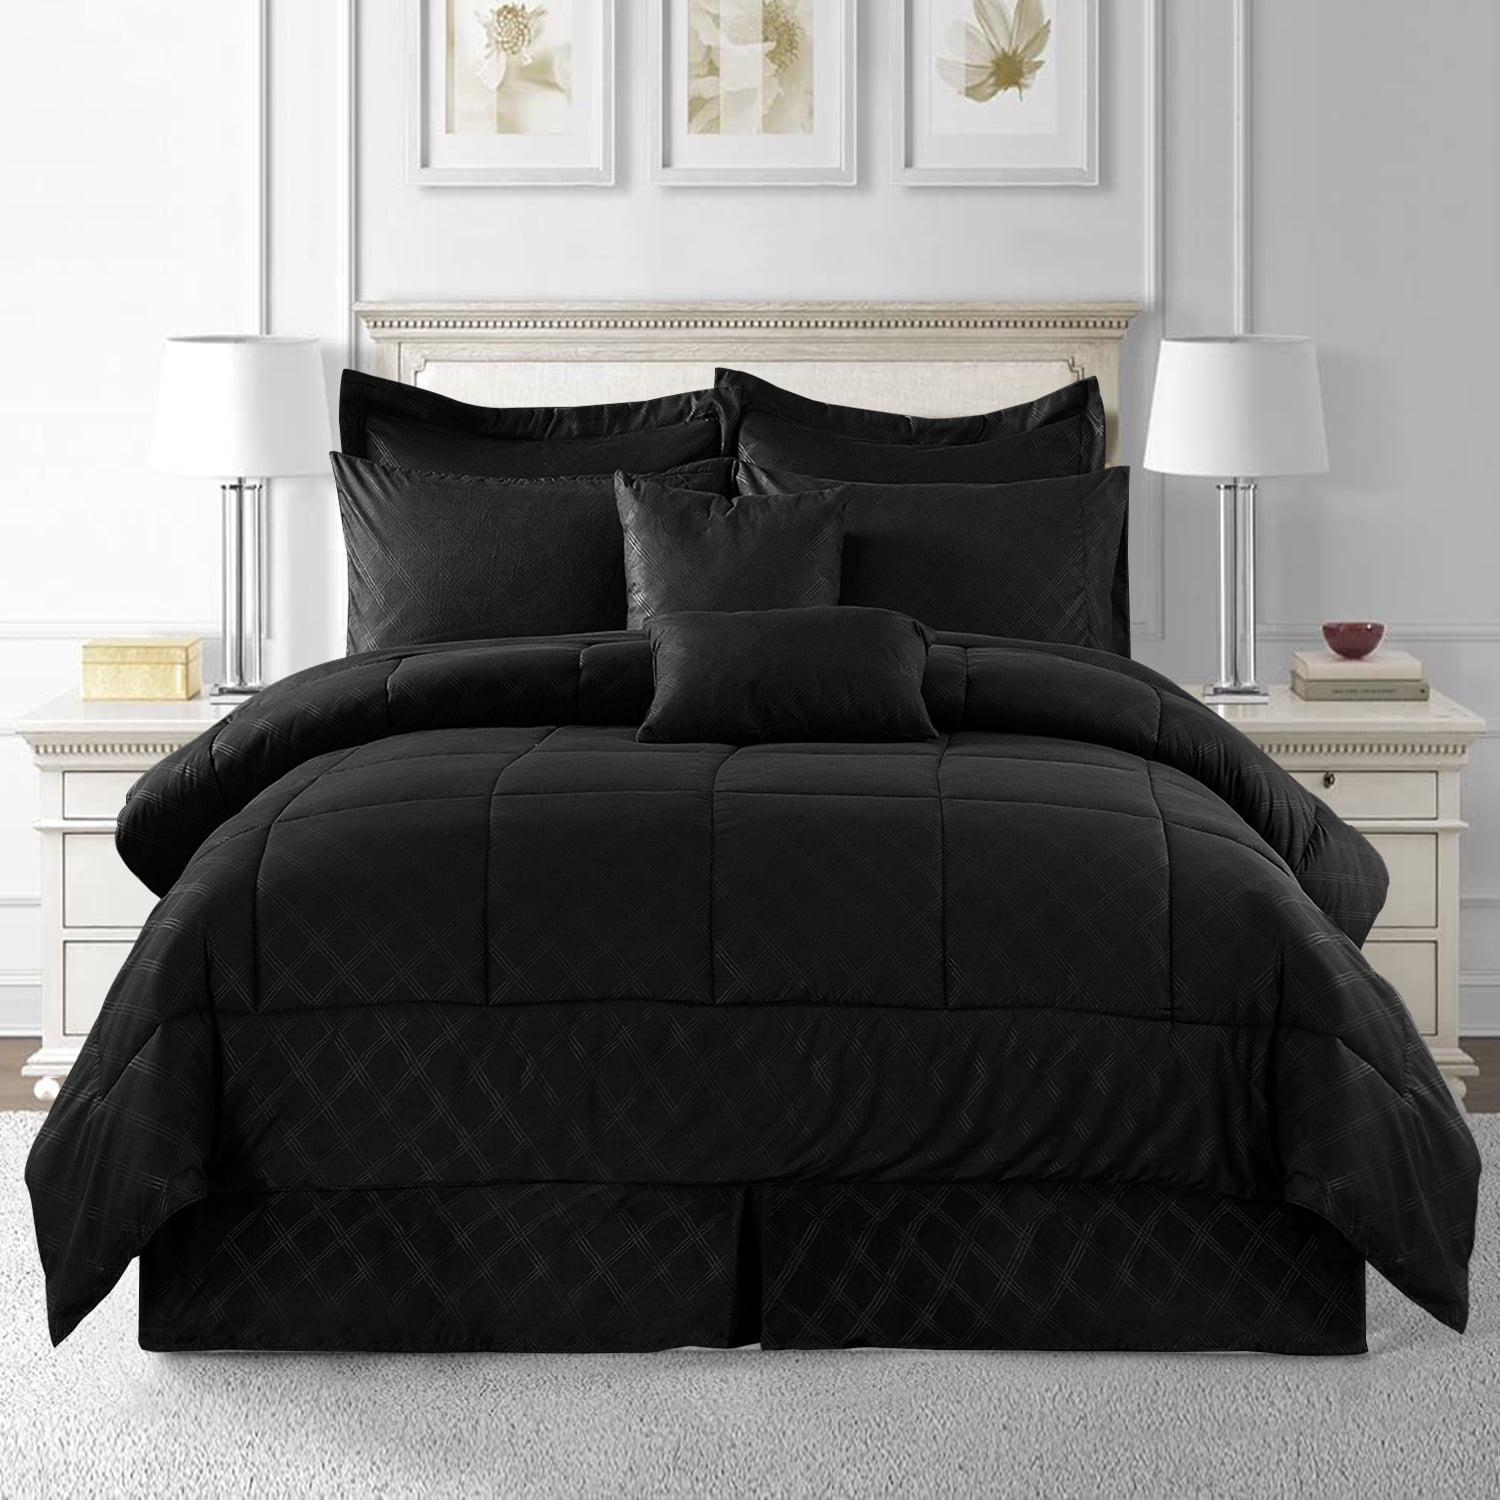 Black/White Chezmoi Collection 6-Piece Luxury Stripe Comforter Bed-In-A-Bag Set 